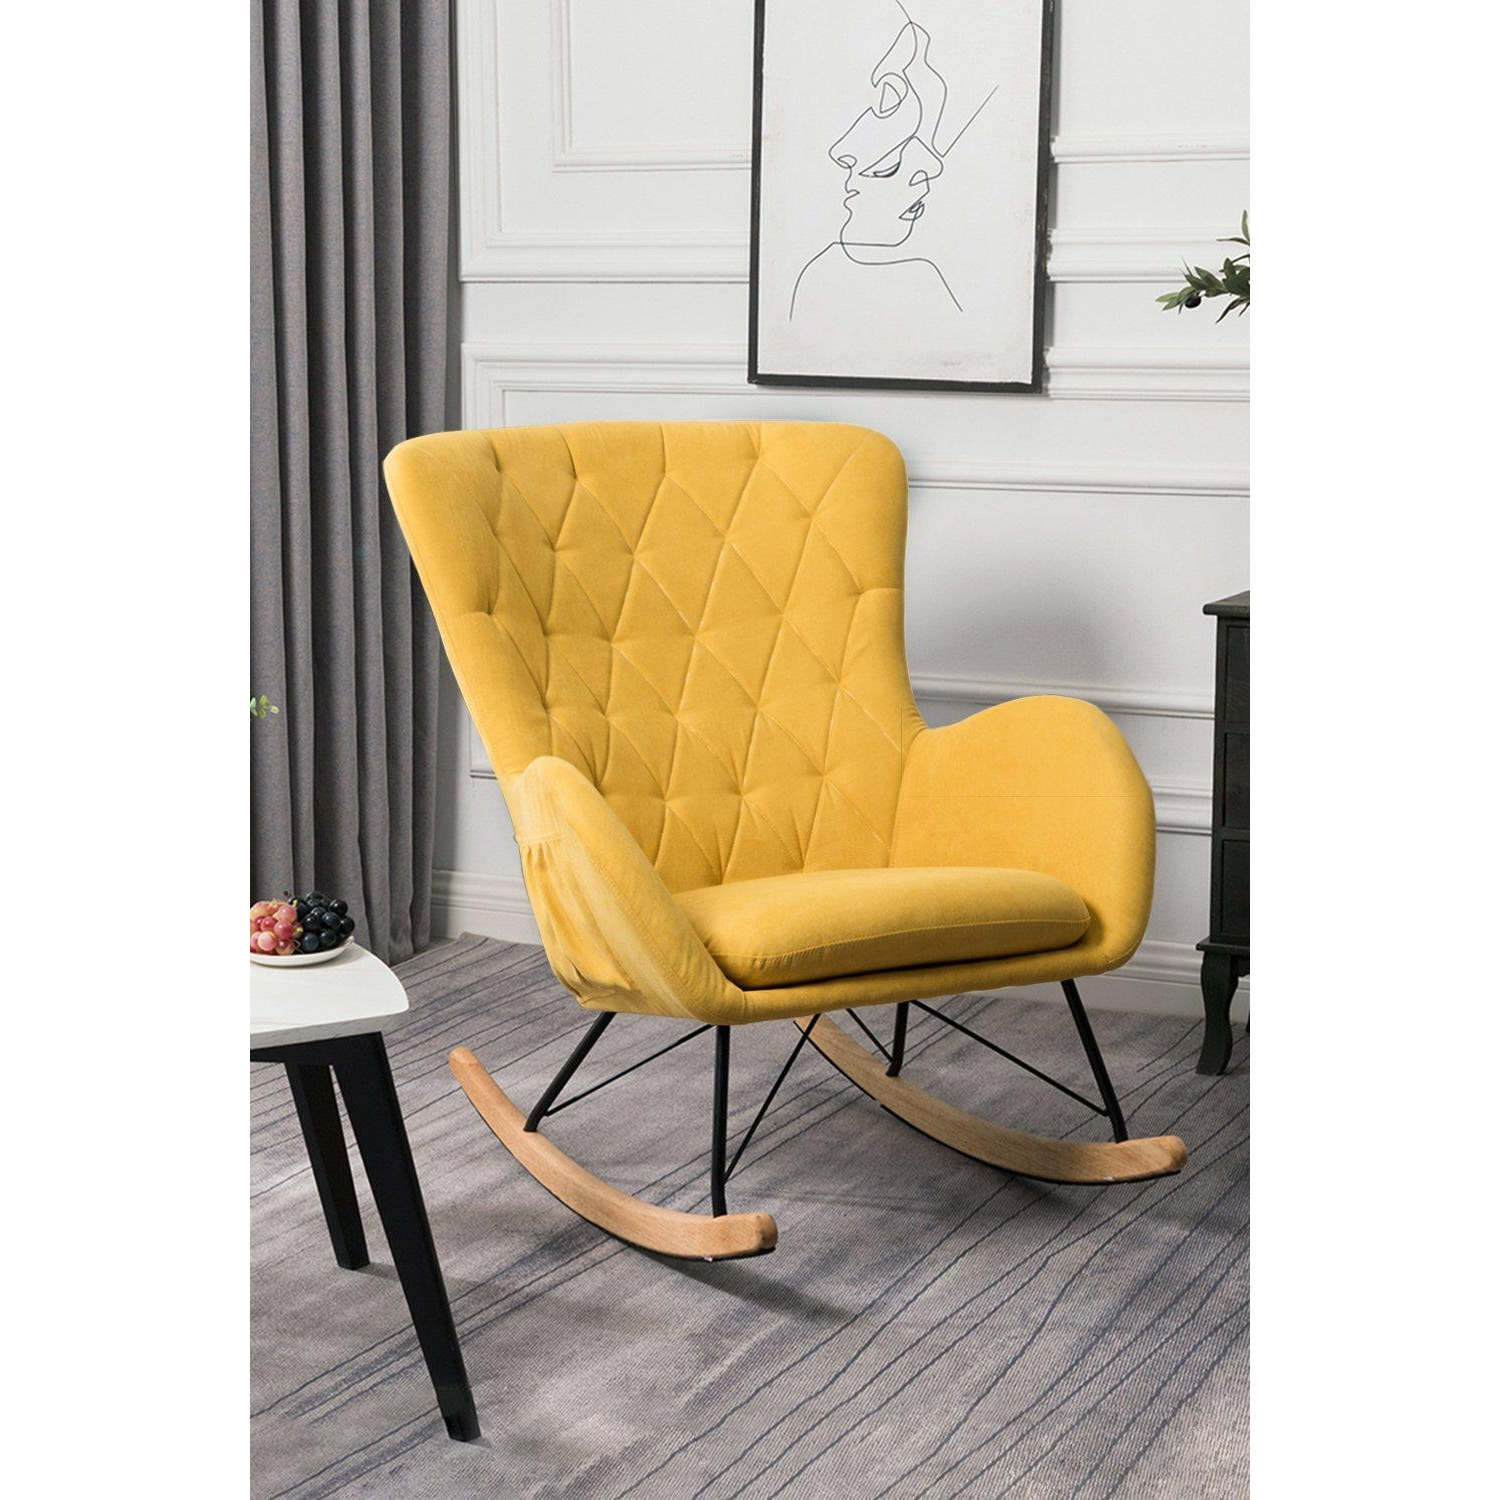 Modern Upholstered Rocking Chair - image 1